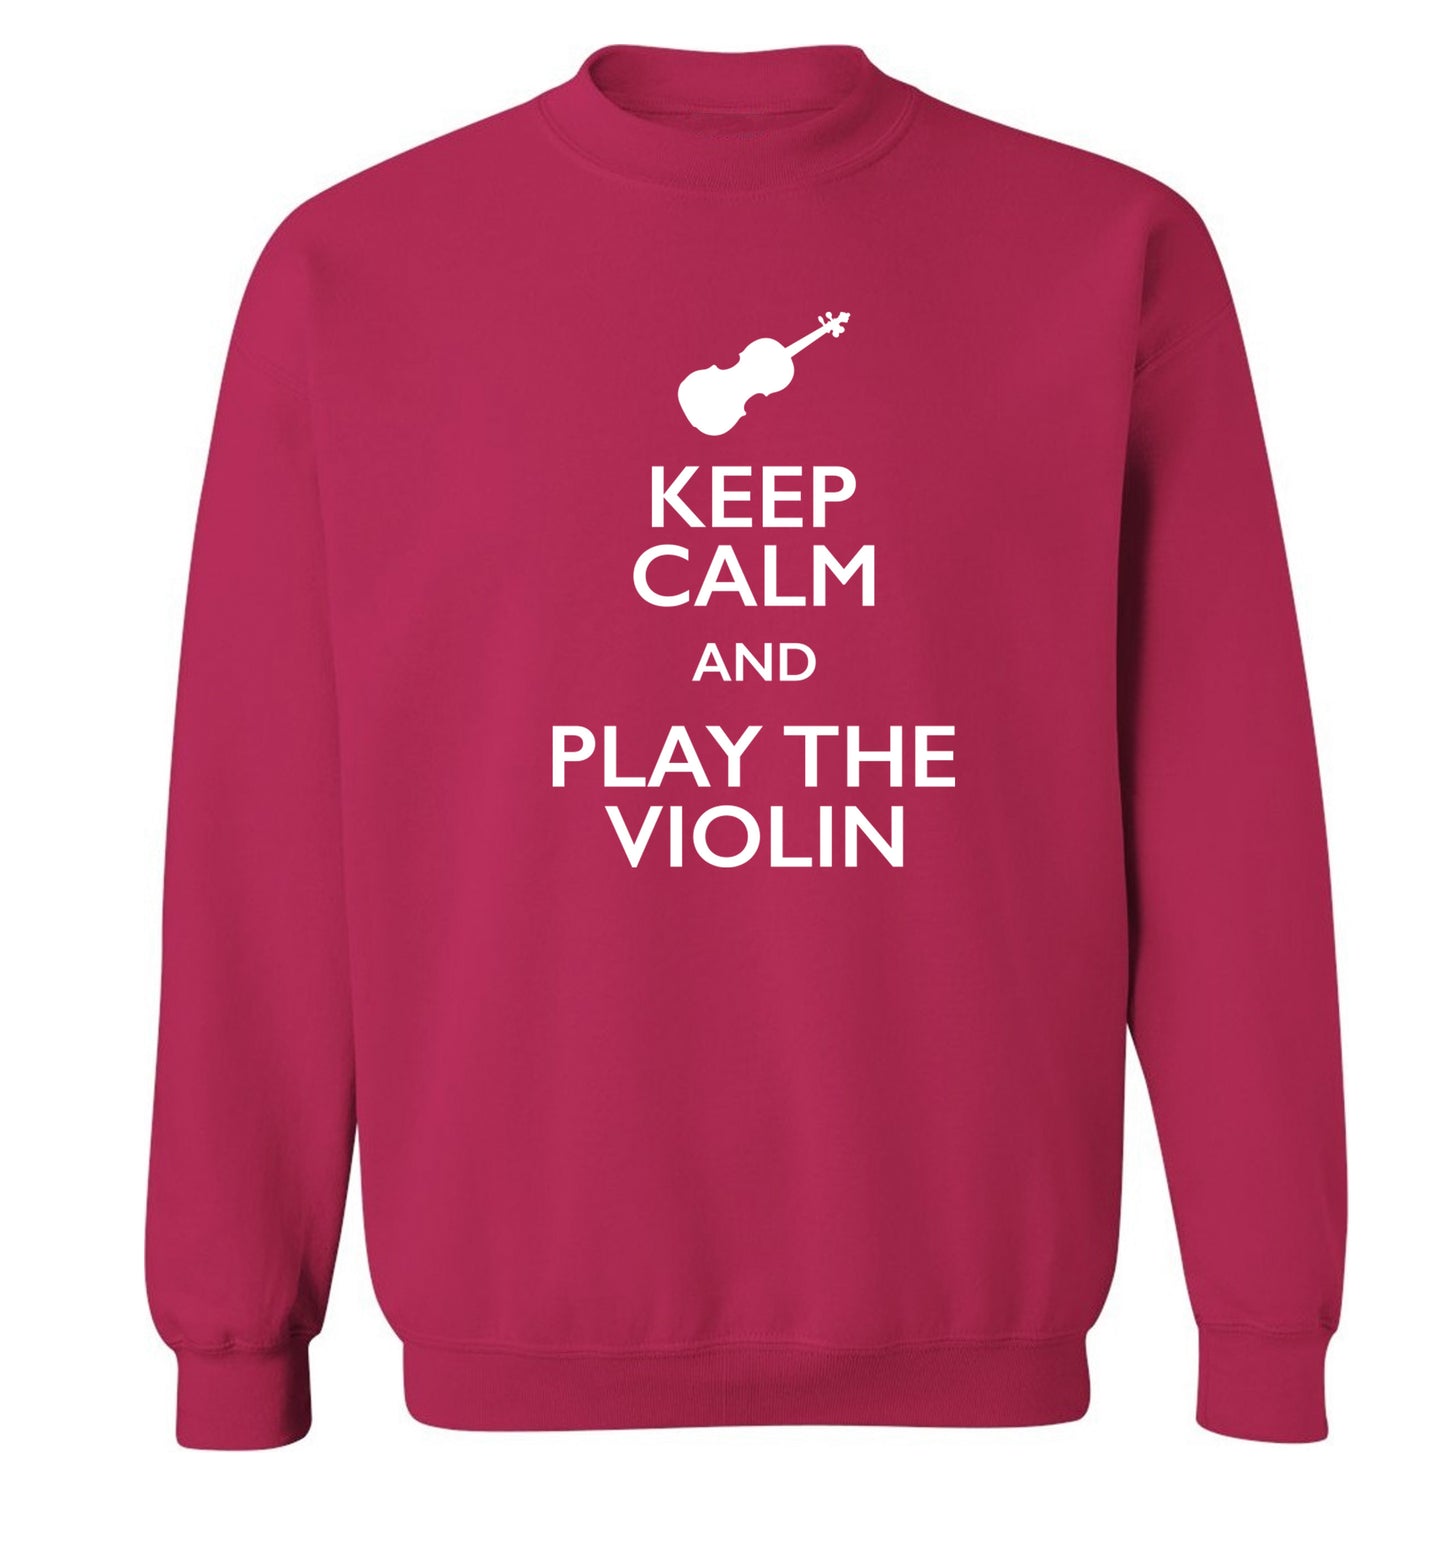 Keep calm and play the violin Adult's unisex pink Sweater 2XL